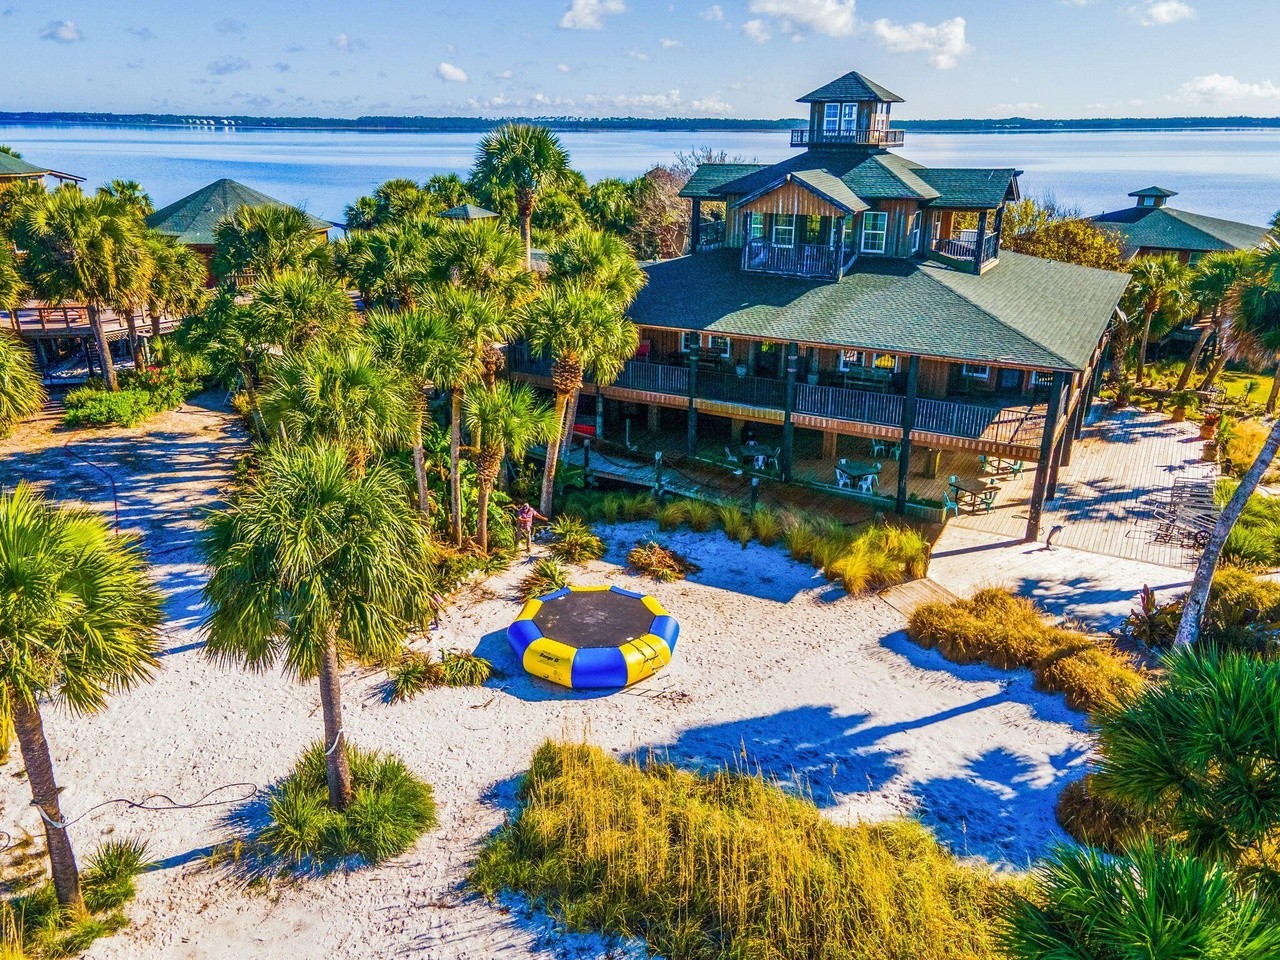 A rare bungalow on Florida's private Black's Island is now for sale